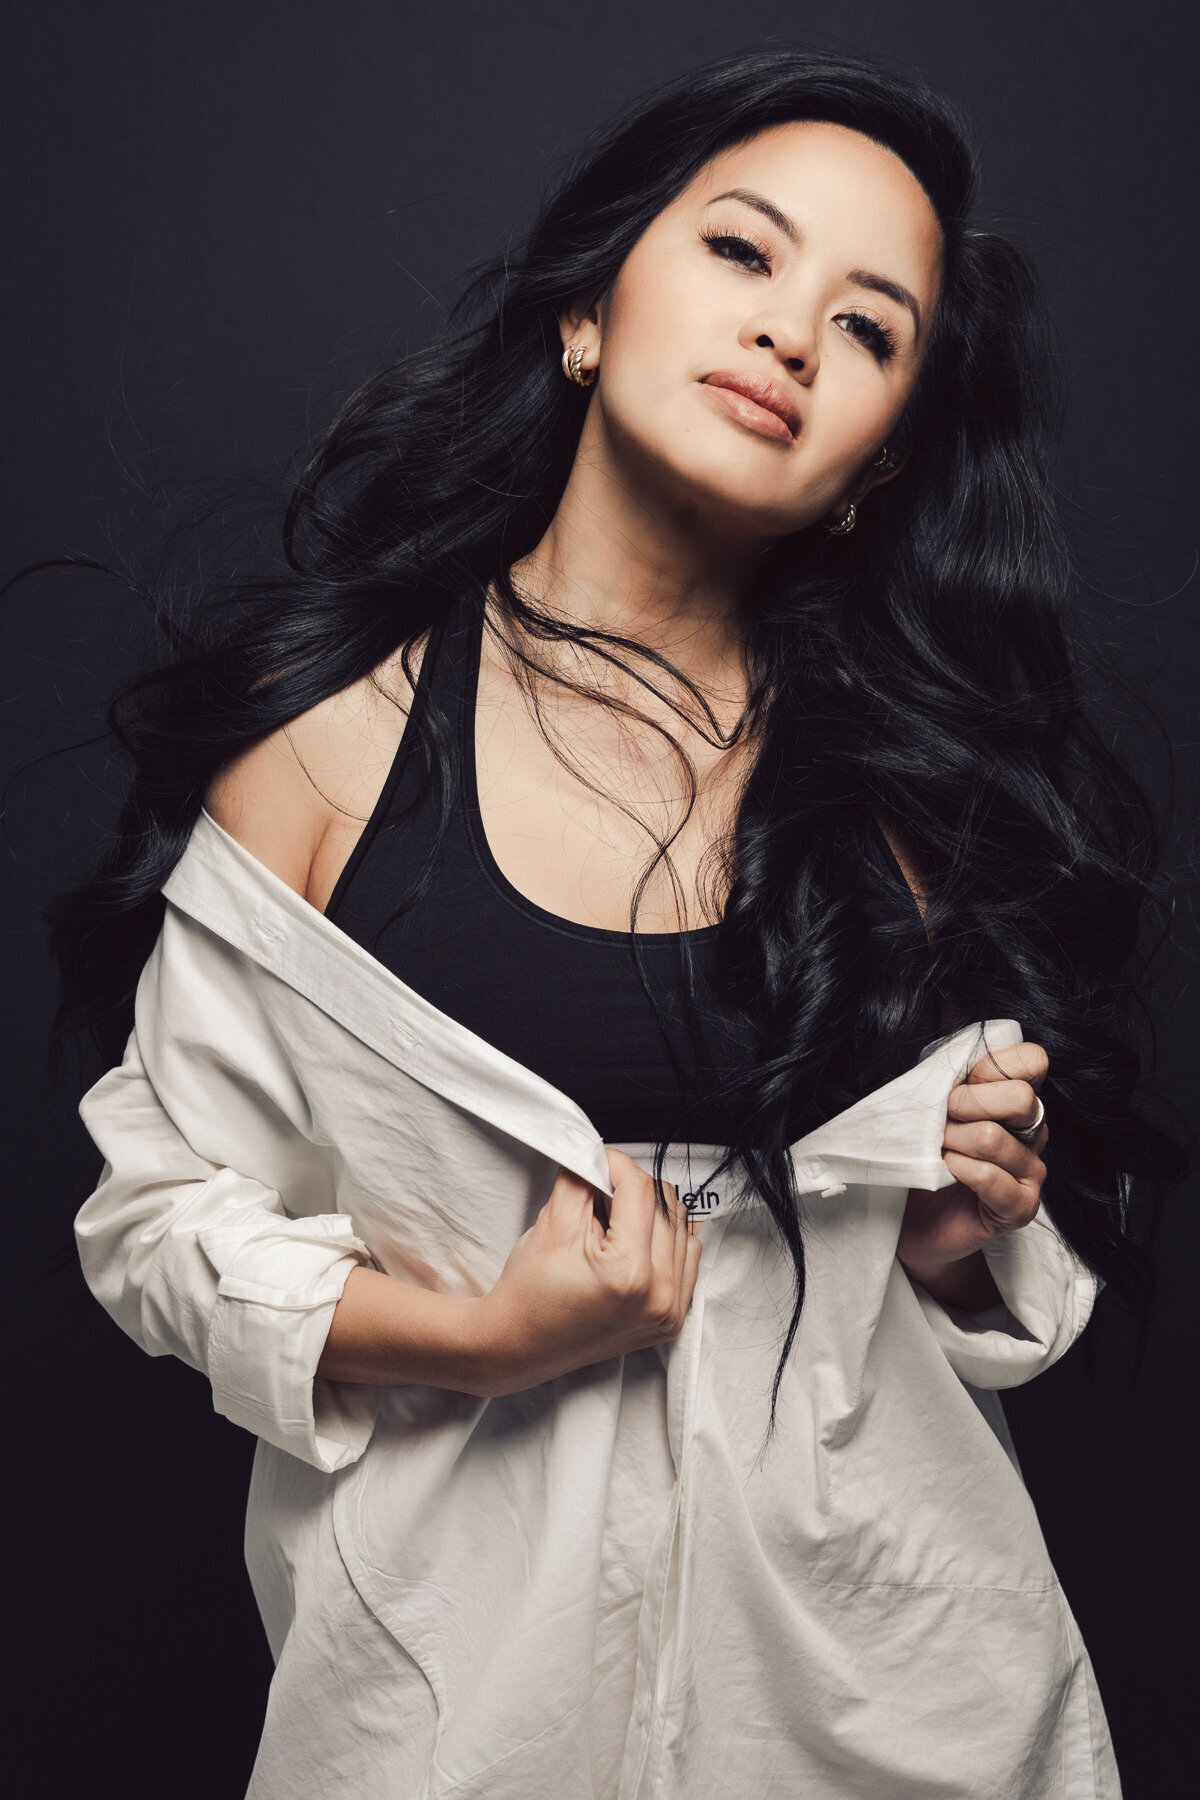 Young Asian woman in a white top unzipping it. She is in front of a black background.